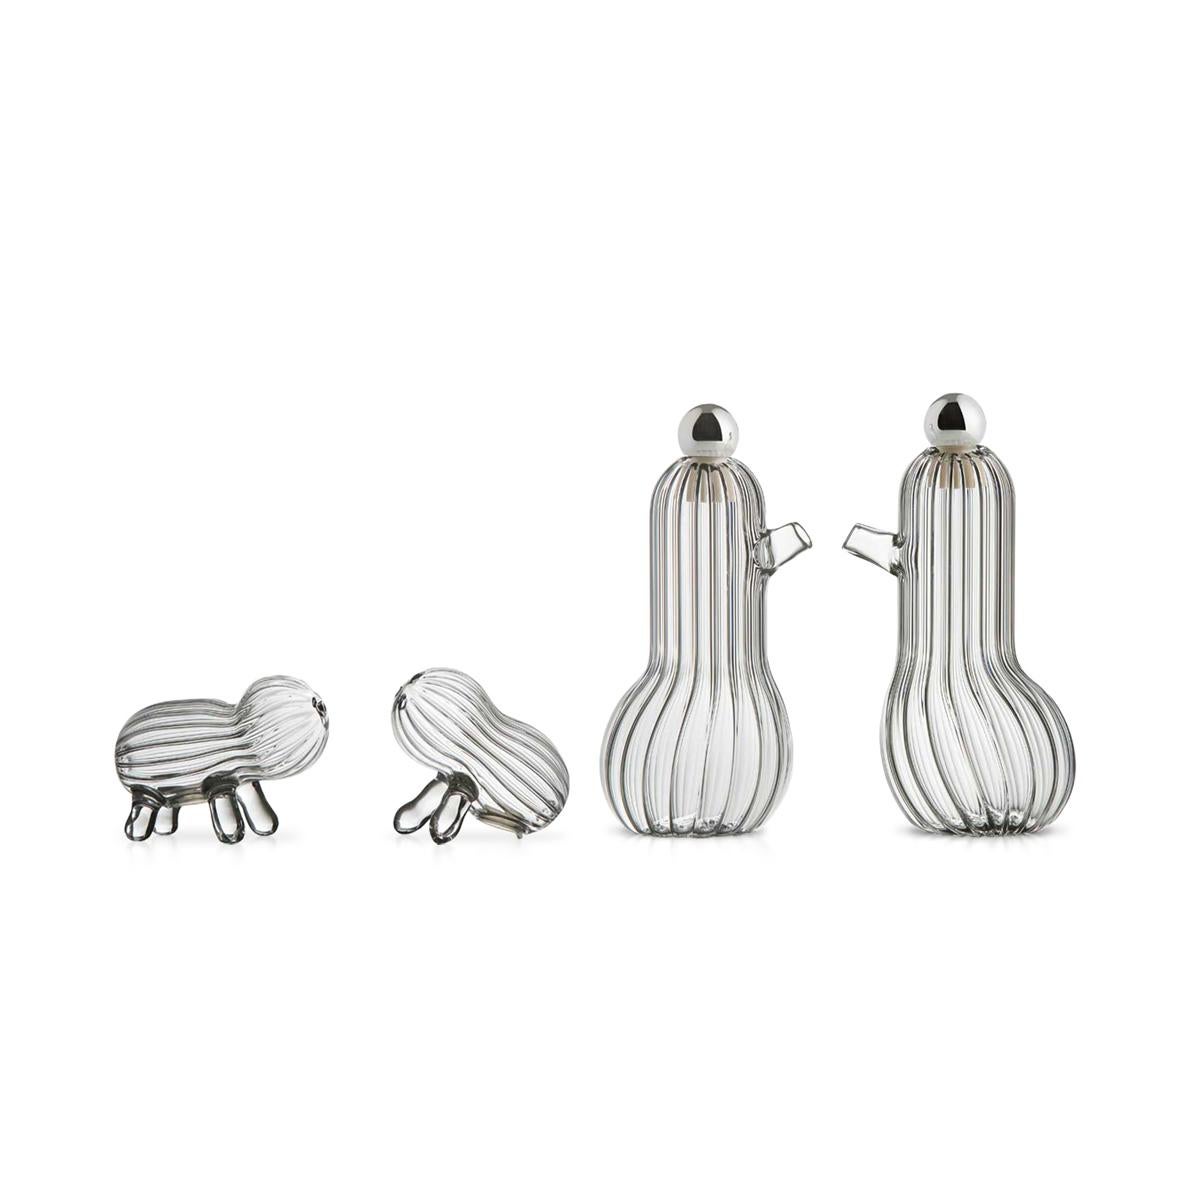 Lilì and Lulù make up a set of oil and vinegar dispensers, this couple of characters is made in mouth blown glass with a grooved finishing. Lilì and Lulù set is part of table Joy, a collection designed by Matteo Cibic whose items are a family of